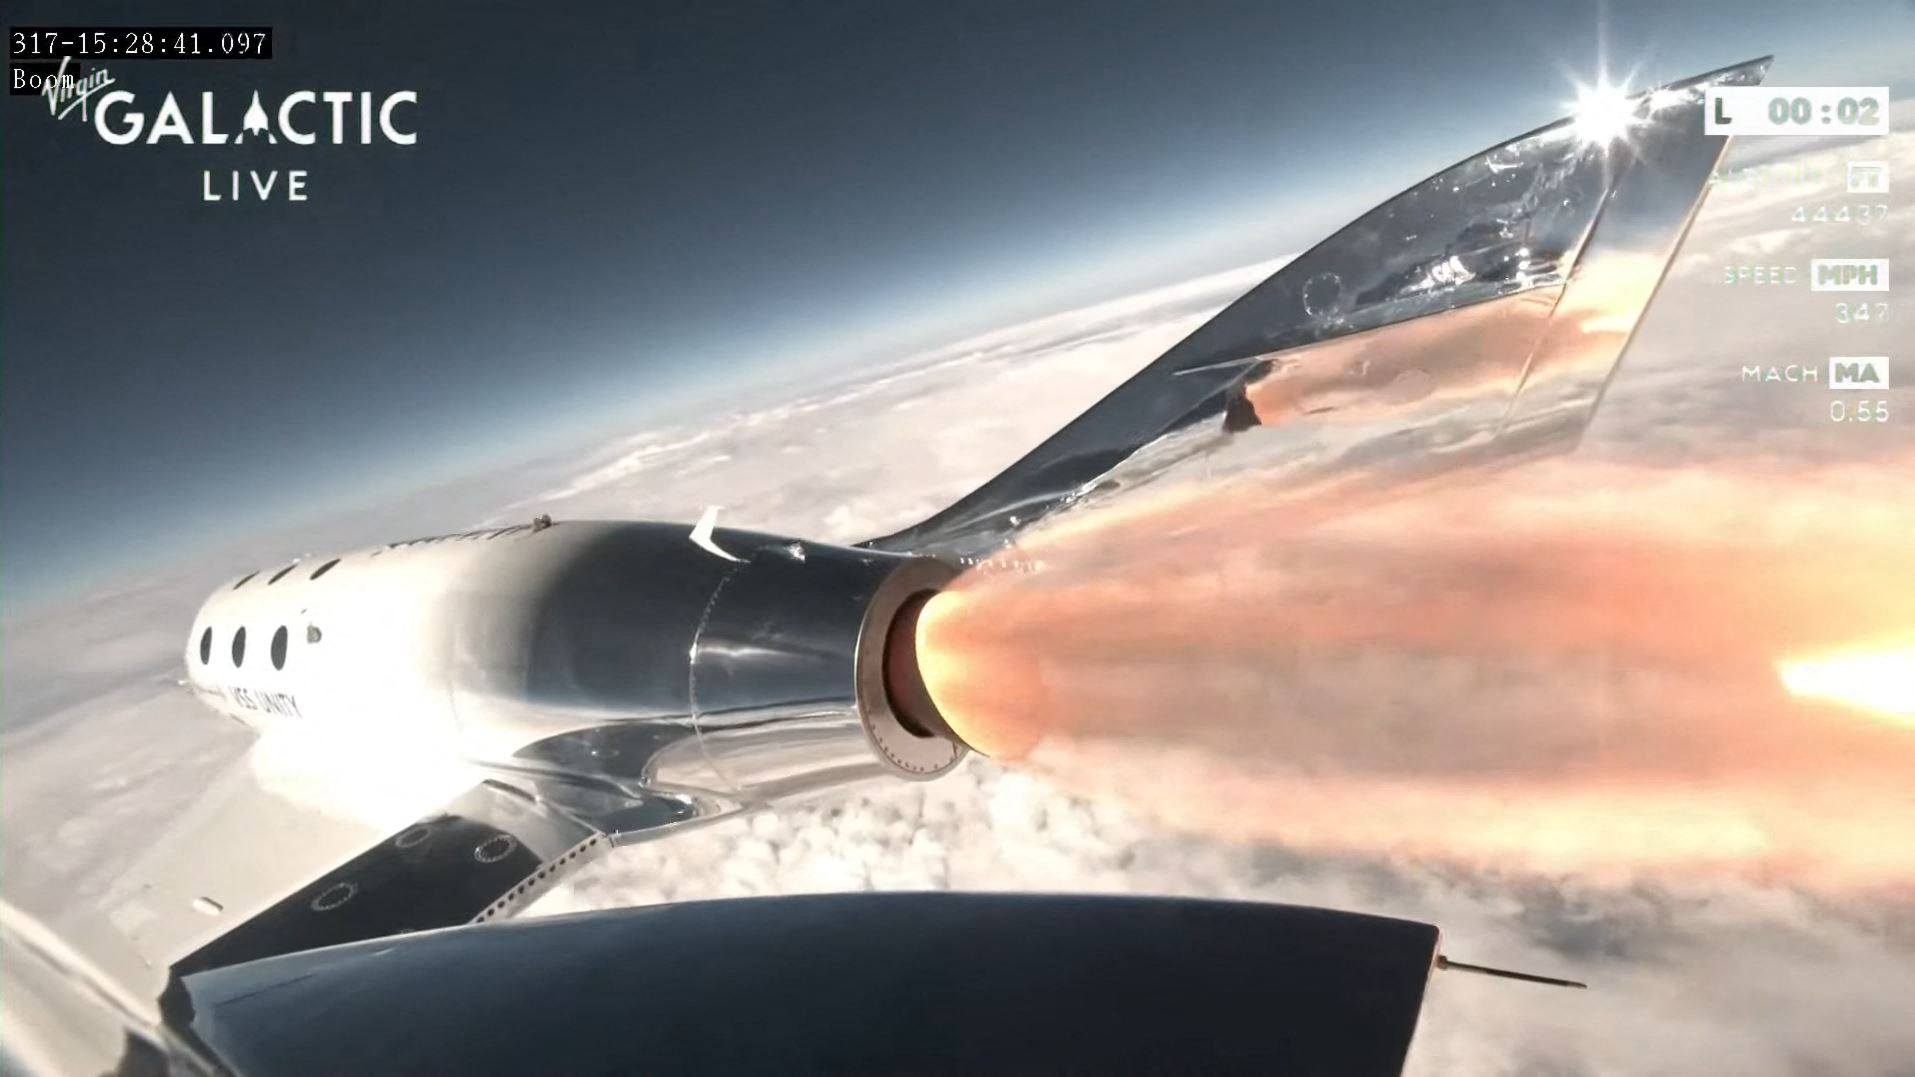 The Galactic 01 mission spacecraft marks the first commercial flight from Spaceport City in New Mexico on Thursday. Photo: Virgin Galactic via AFP